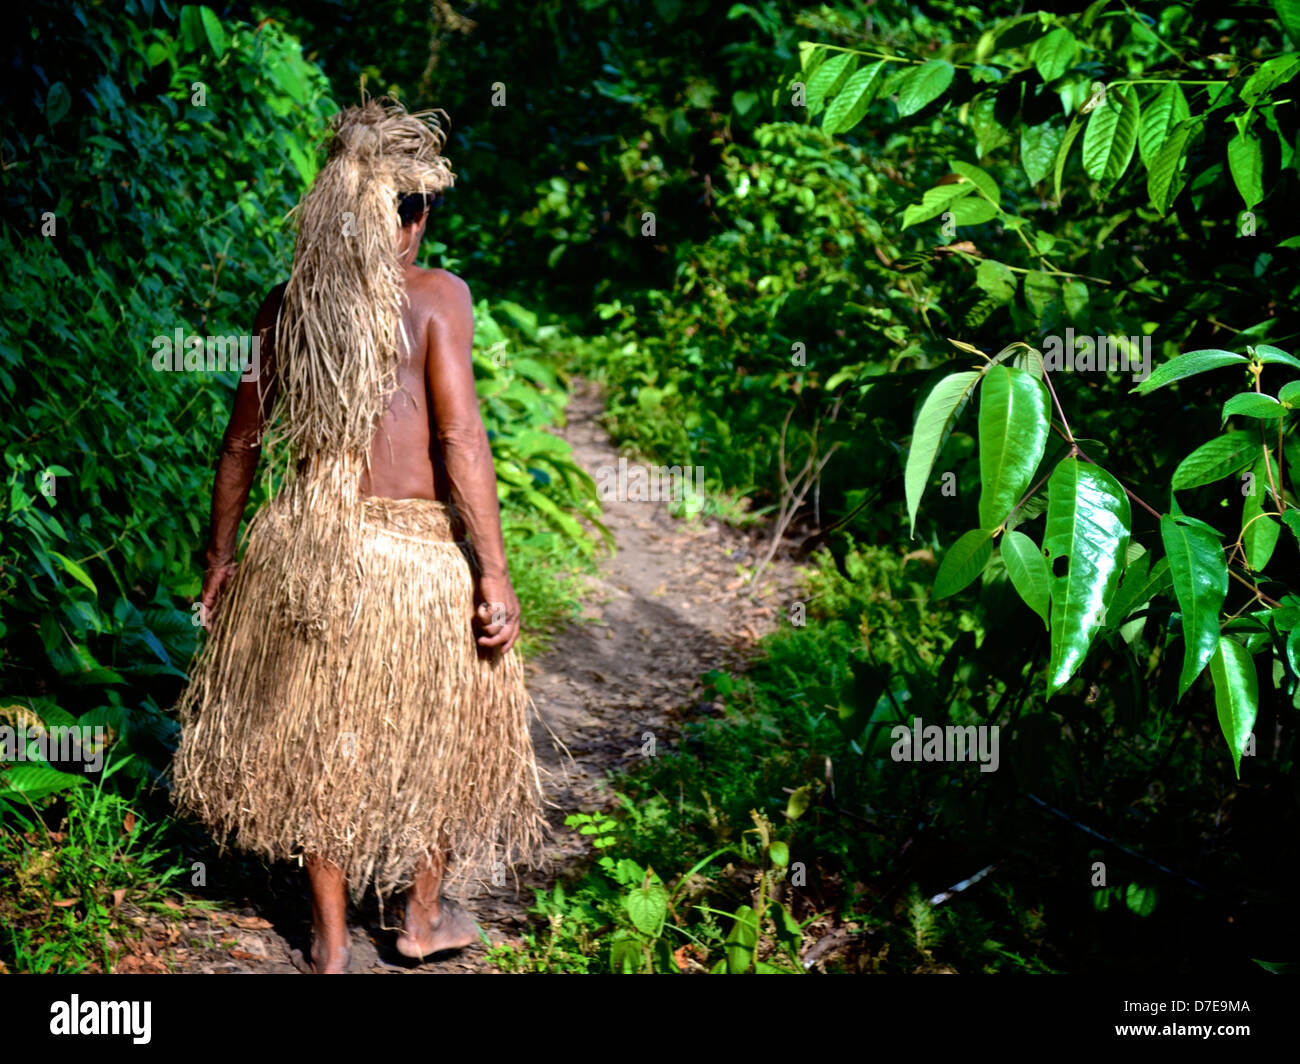 A member of the Yagua tribe in the Amazon rain forest near Iquitos, Peru Stock Photo